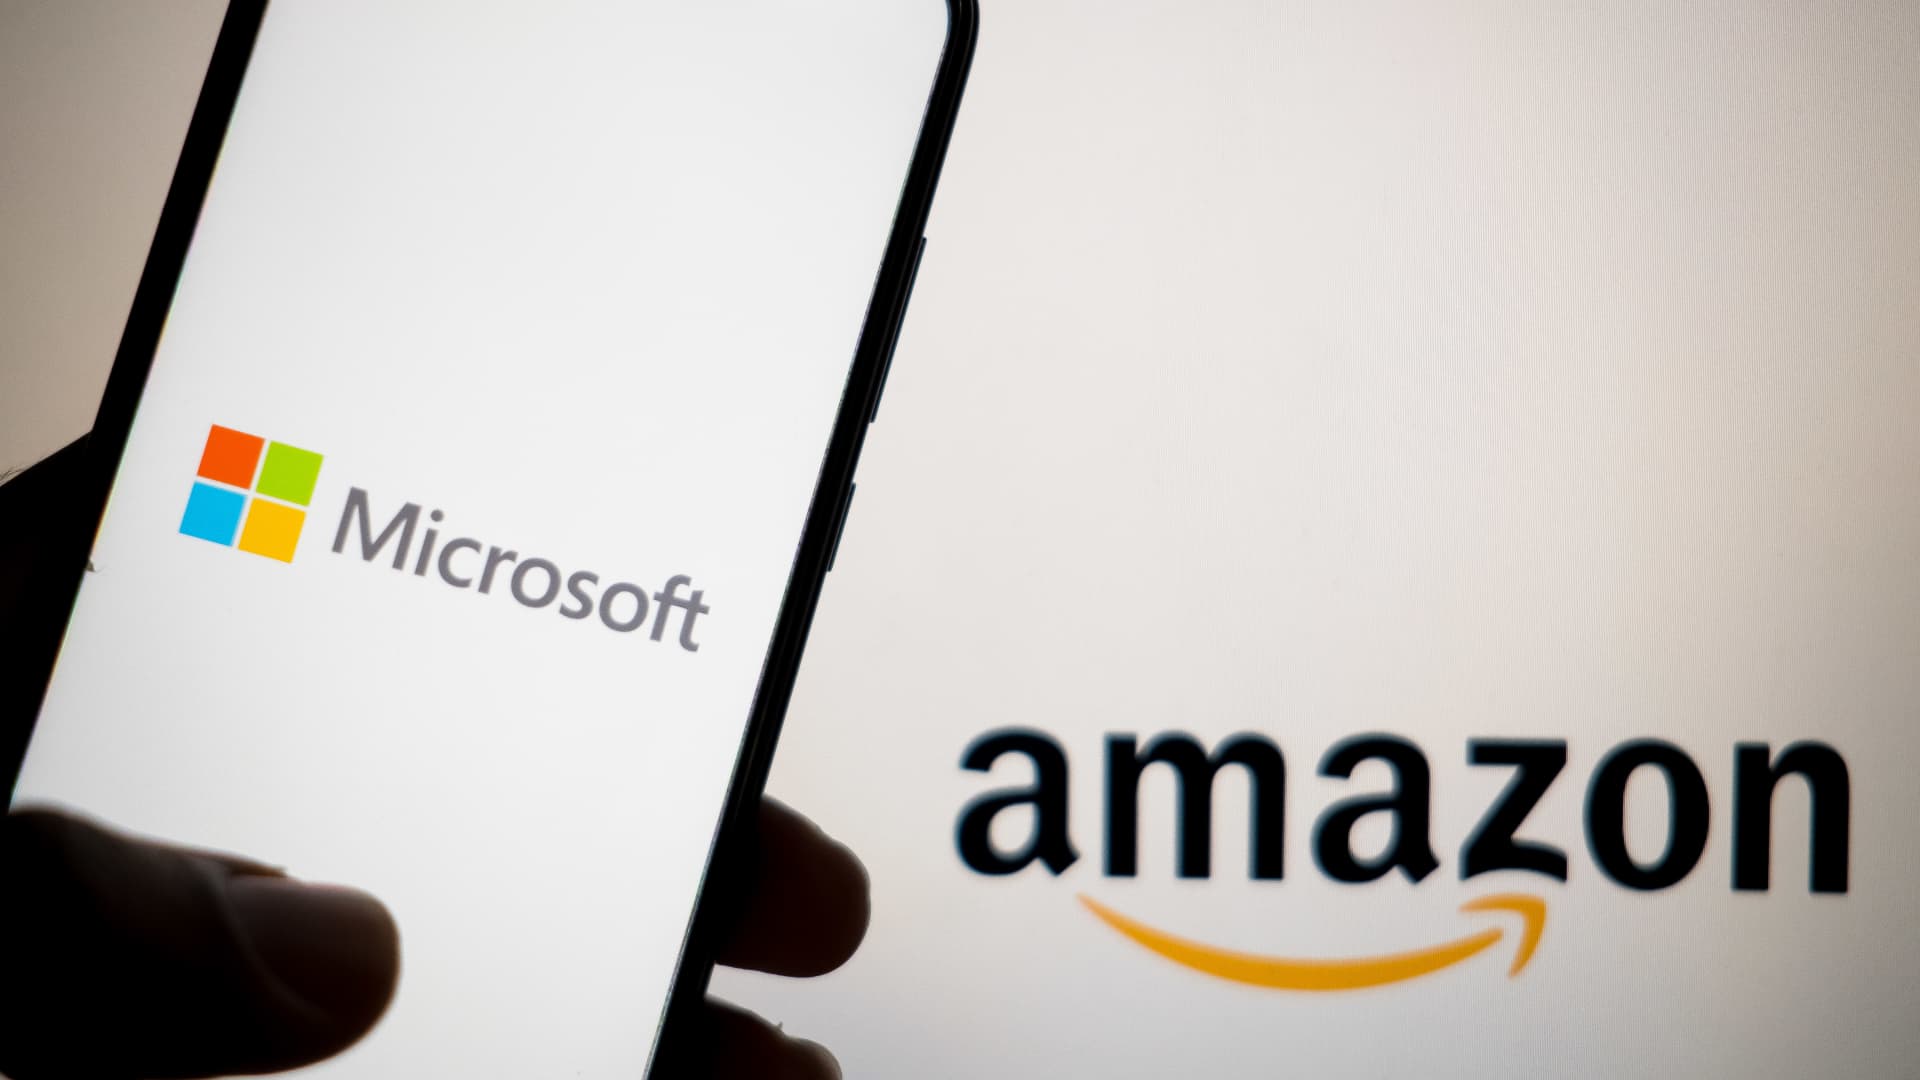 Microsoft and Amazon to spend $5.6 billion into France as Macron courts tech giants